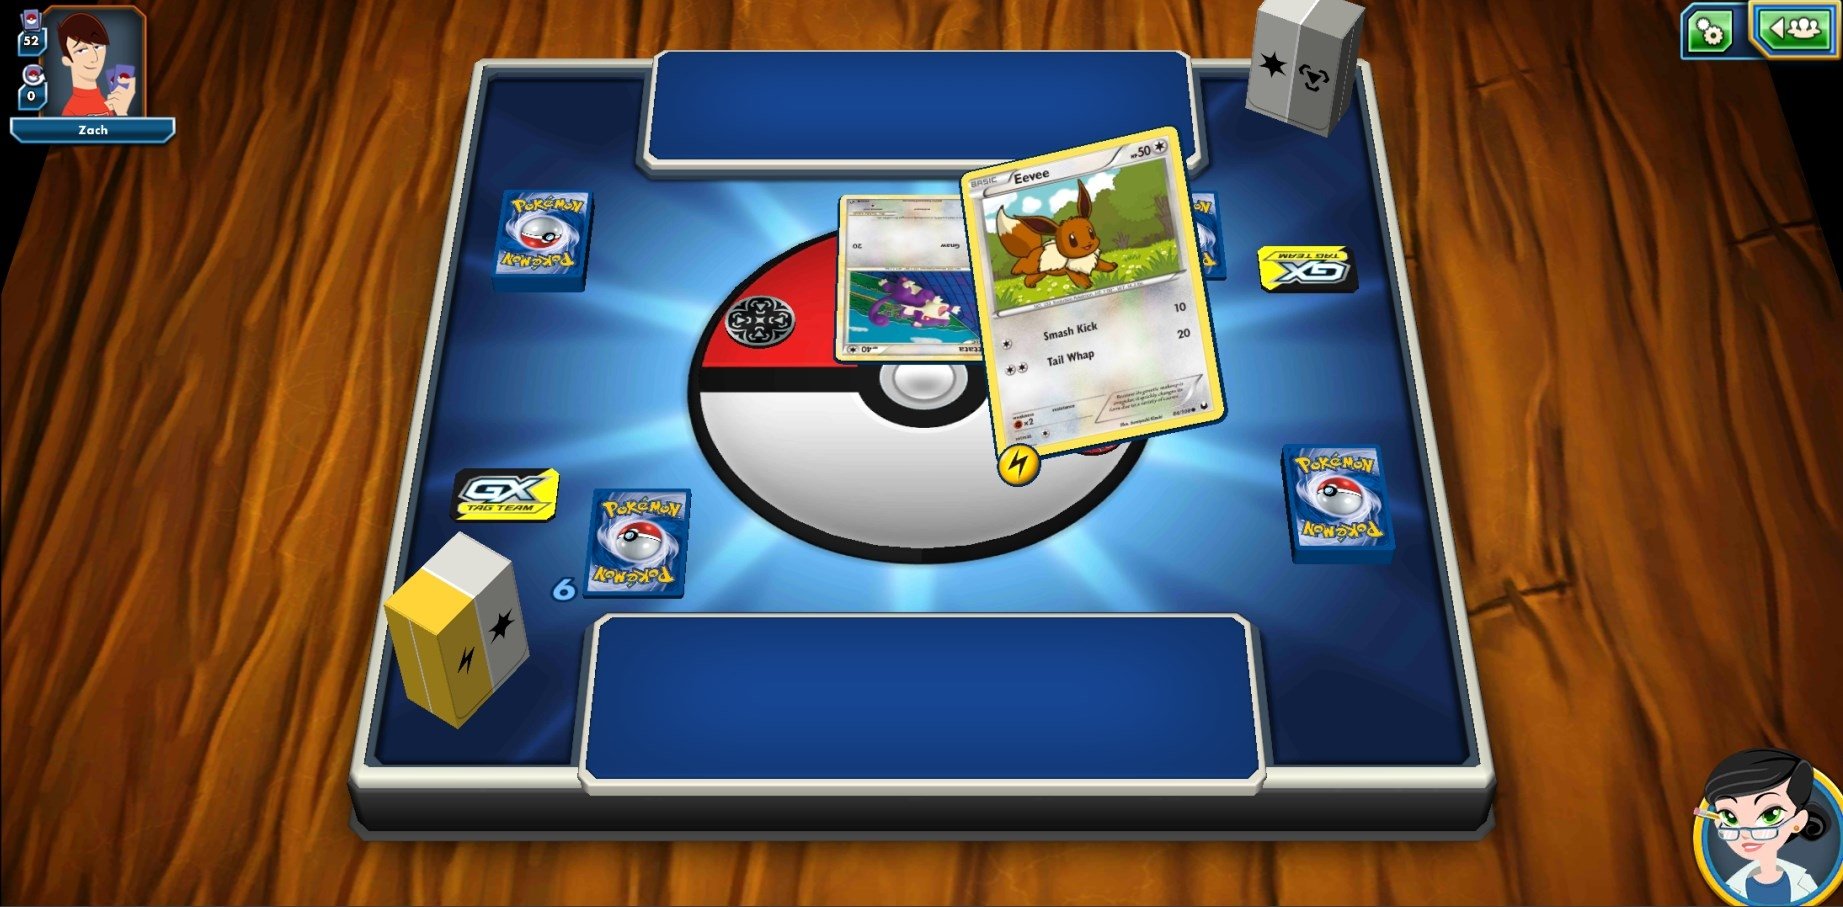 Pokemon Trading Card Game - Play Game Online